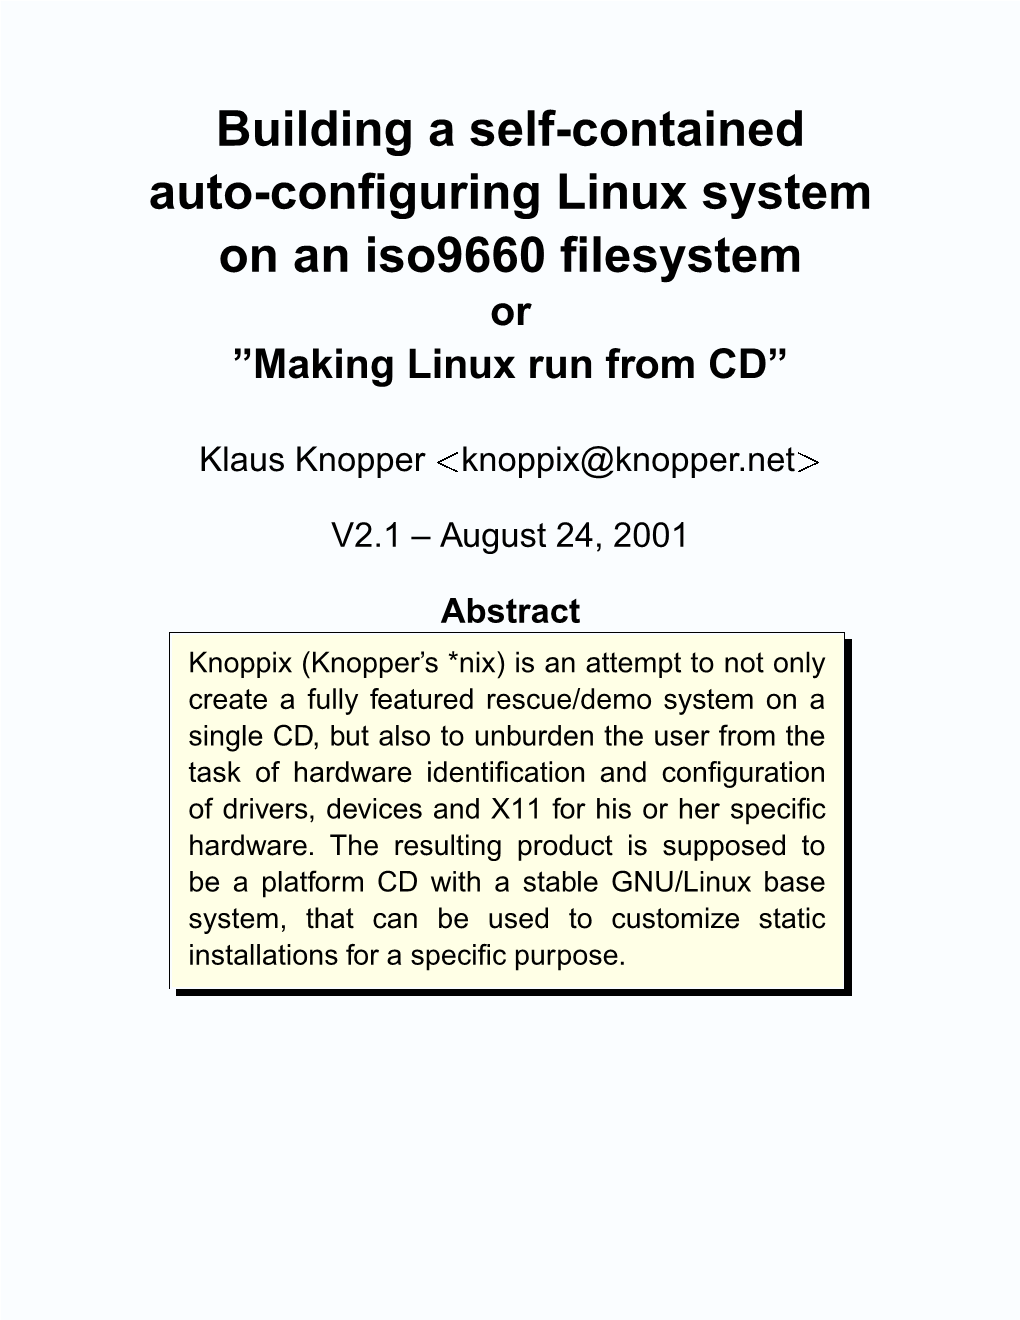 Building a Self-Contained Auto-Configuring Linux System On